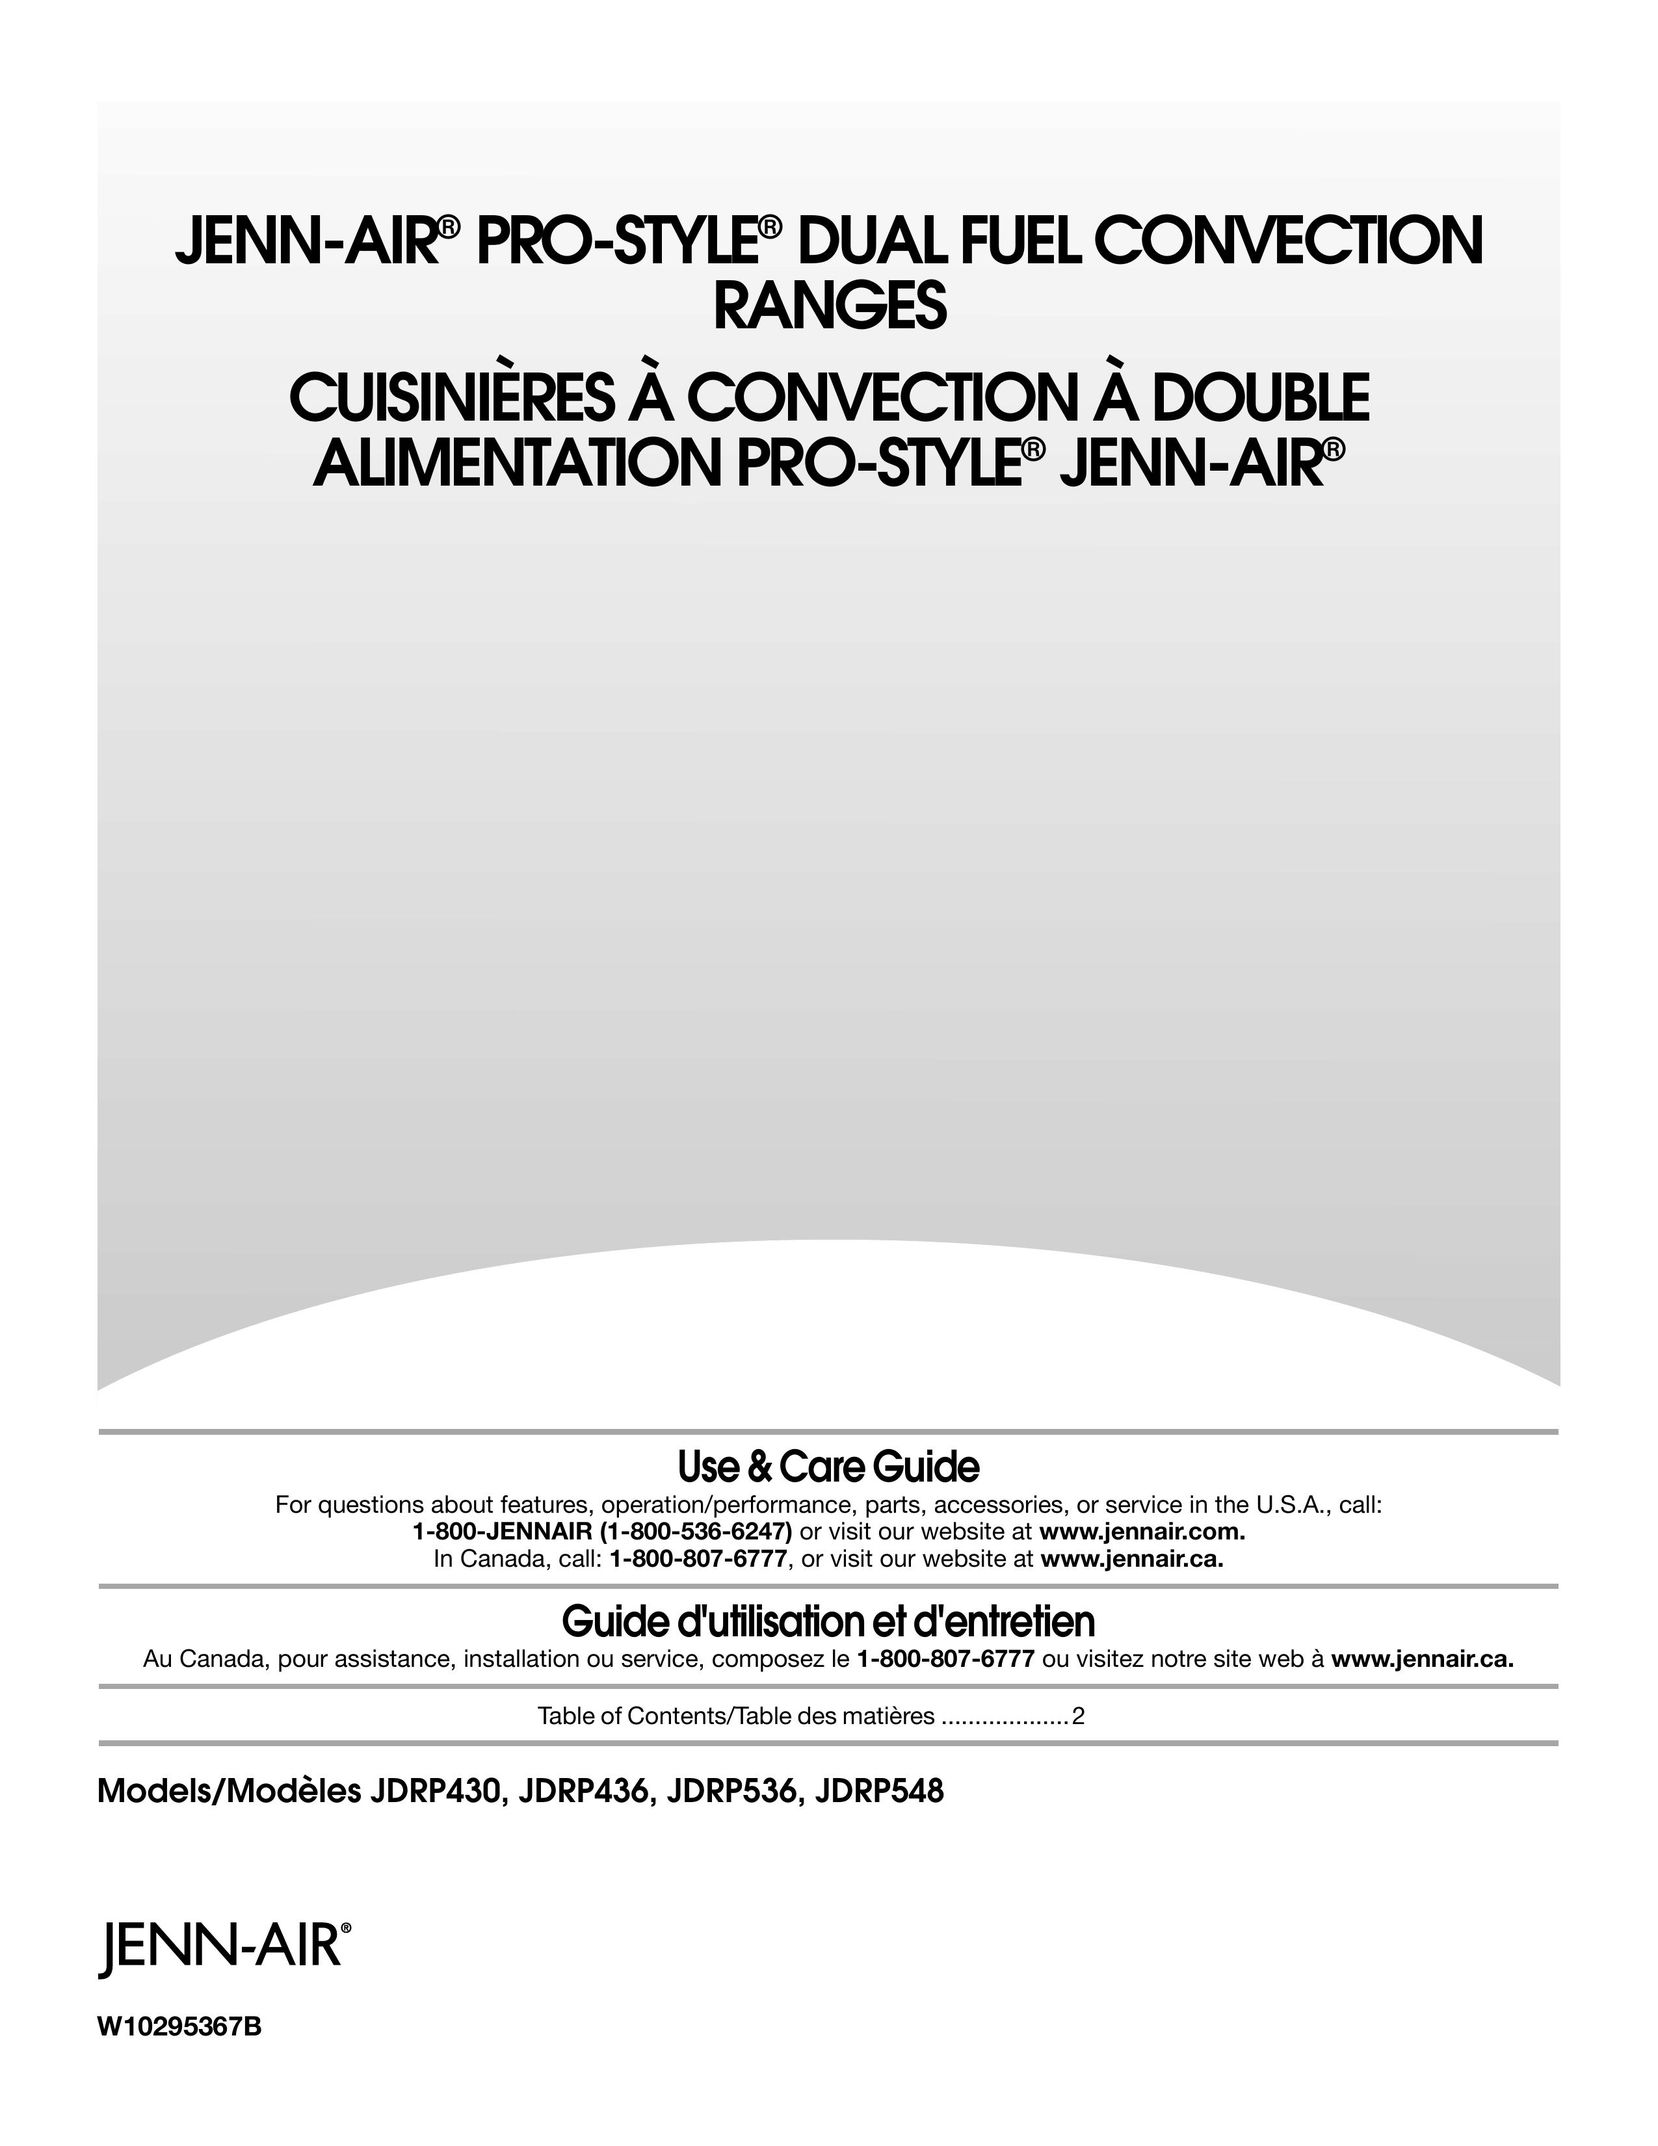 Jenn-Air JDRP430 Convection Oven User Manual